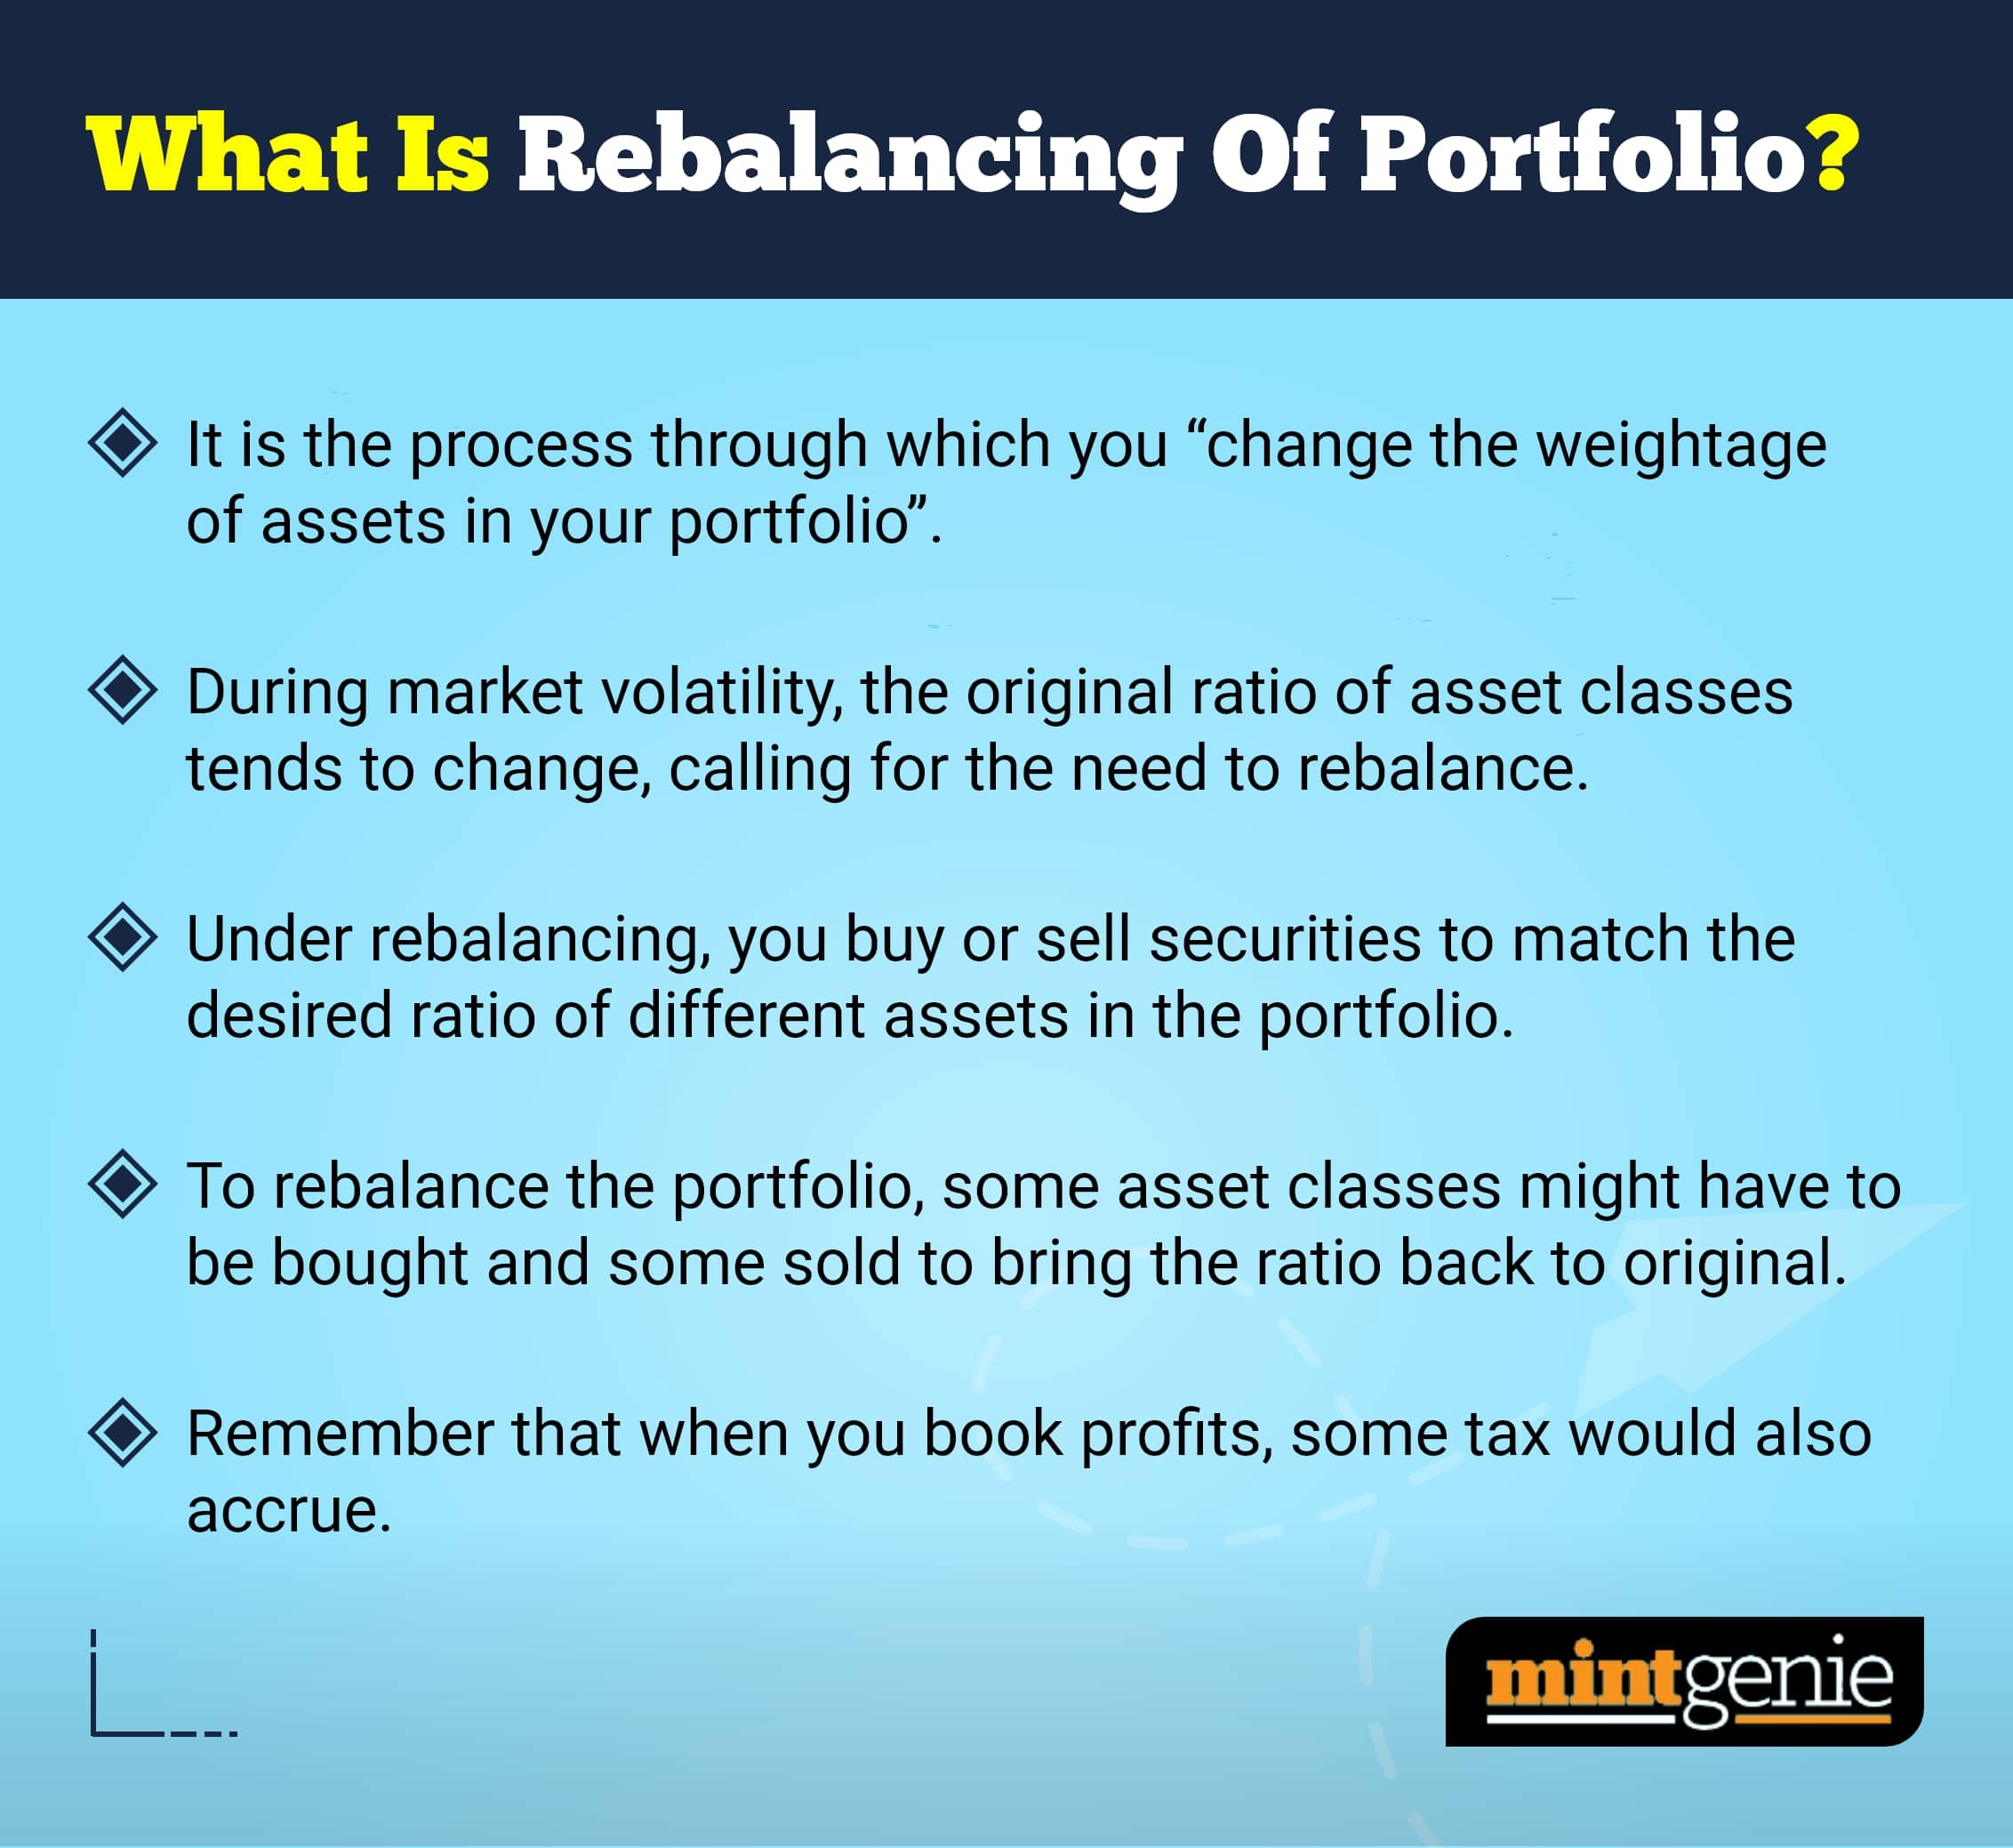 Rebalancing of portfolio is the process through which you change the weightage of assets in your portfolio.&nbsp;